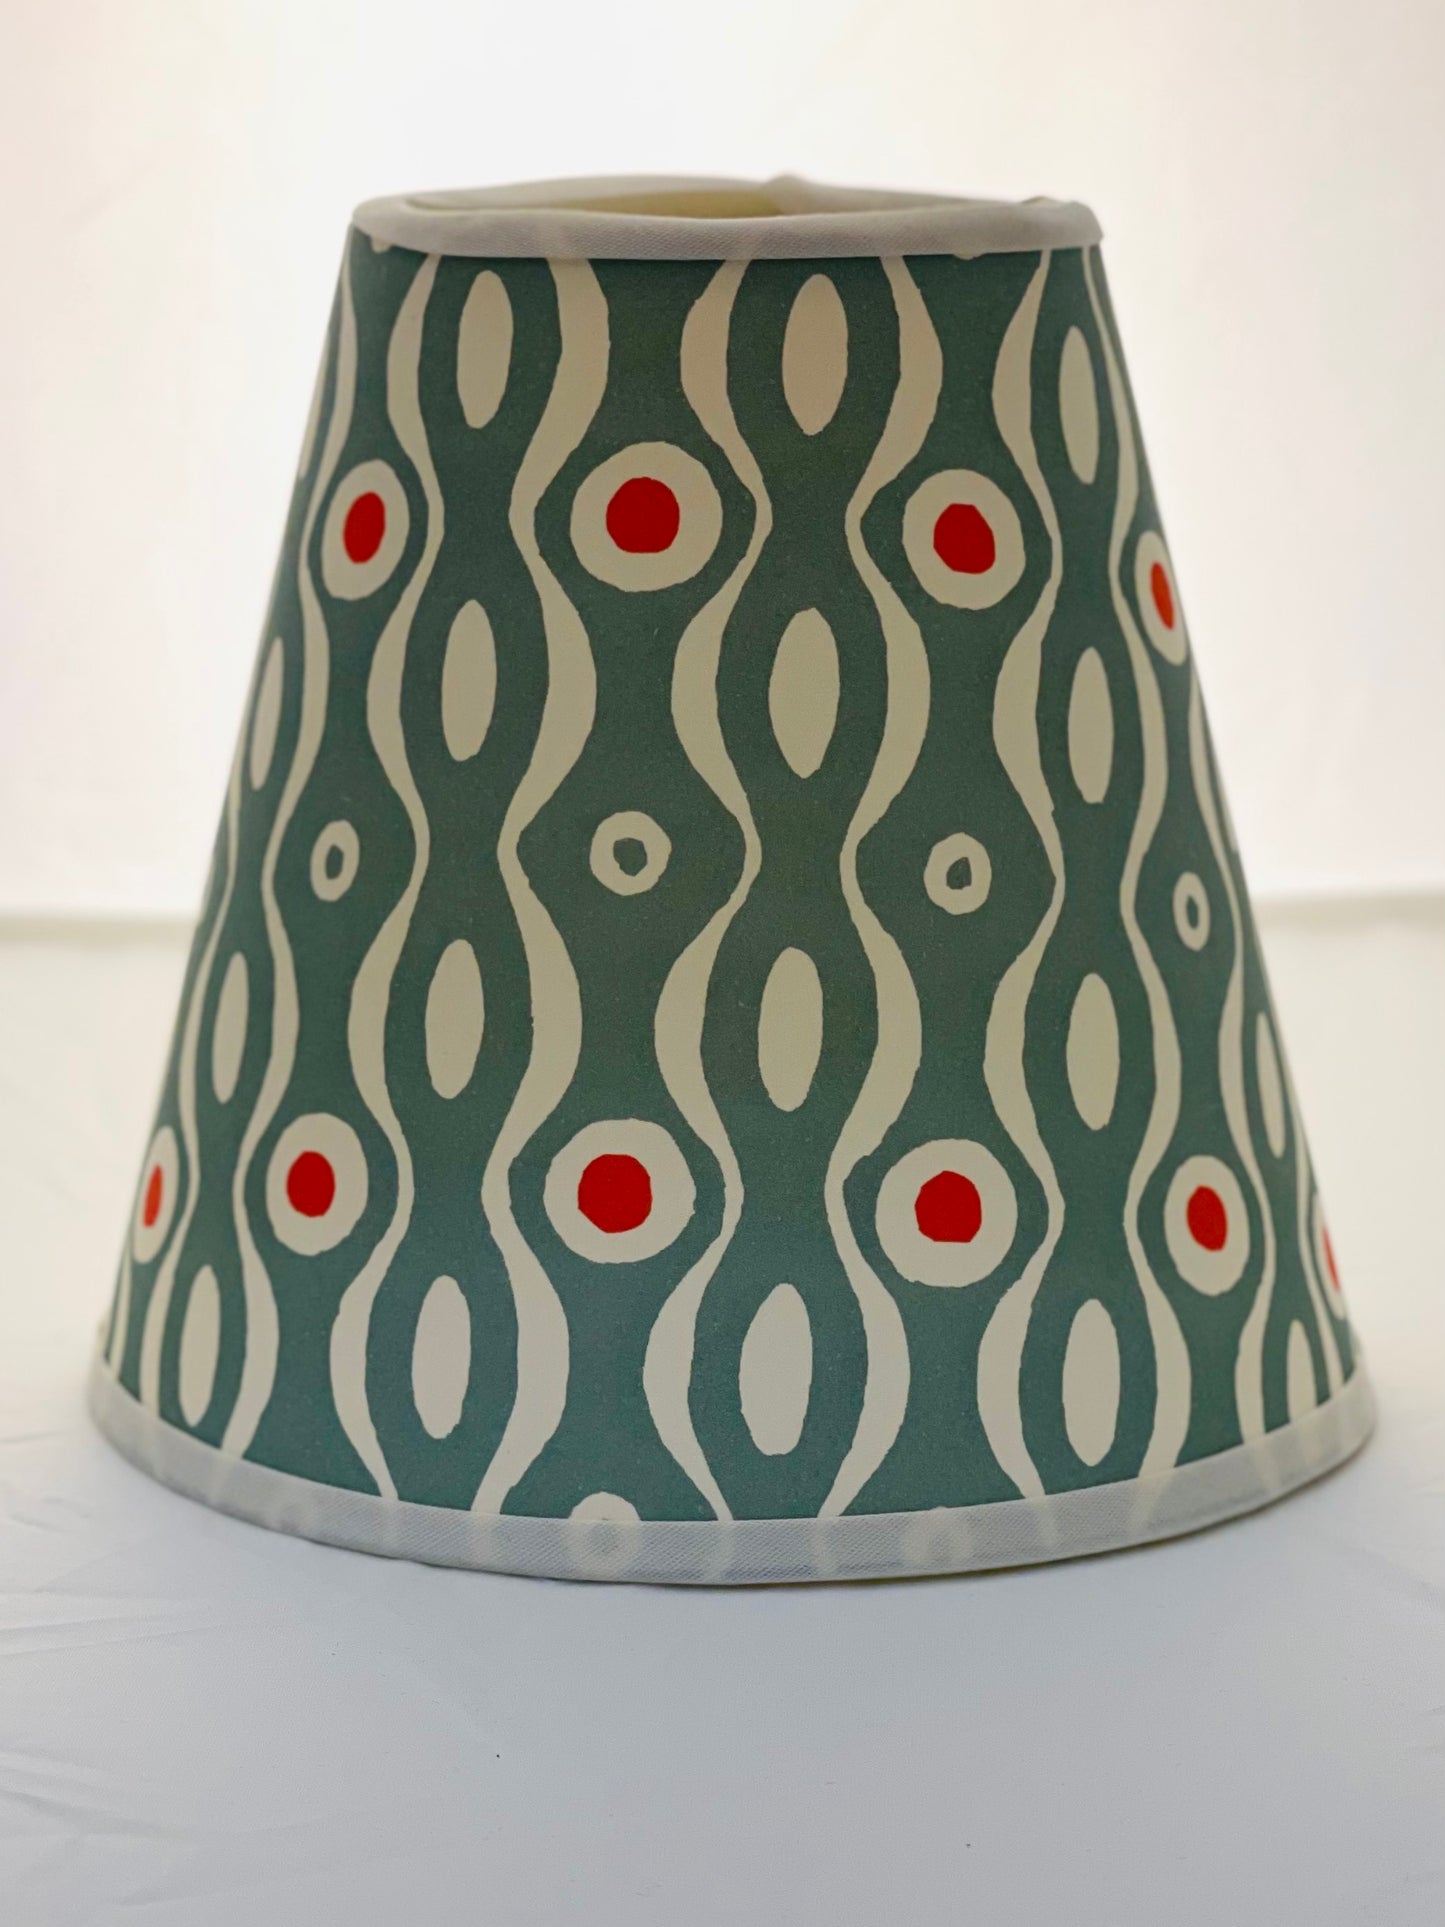 Small Clip-On Lampshade. Patterned Paper from England. "Persephone" Grayish Teal with Orange. White Trim.